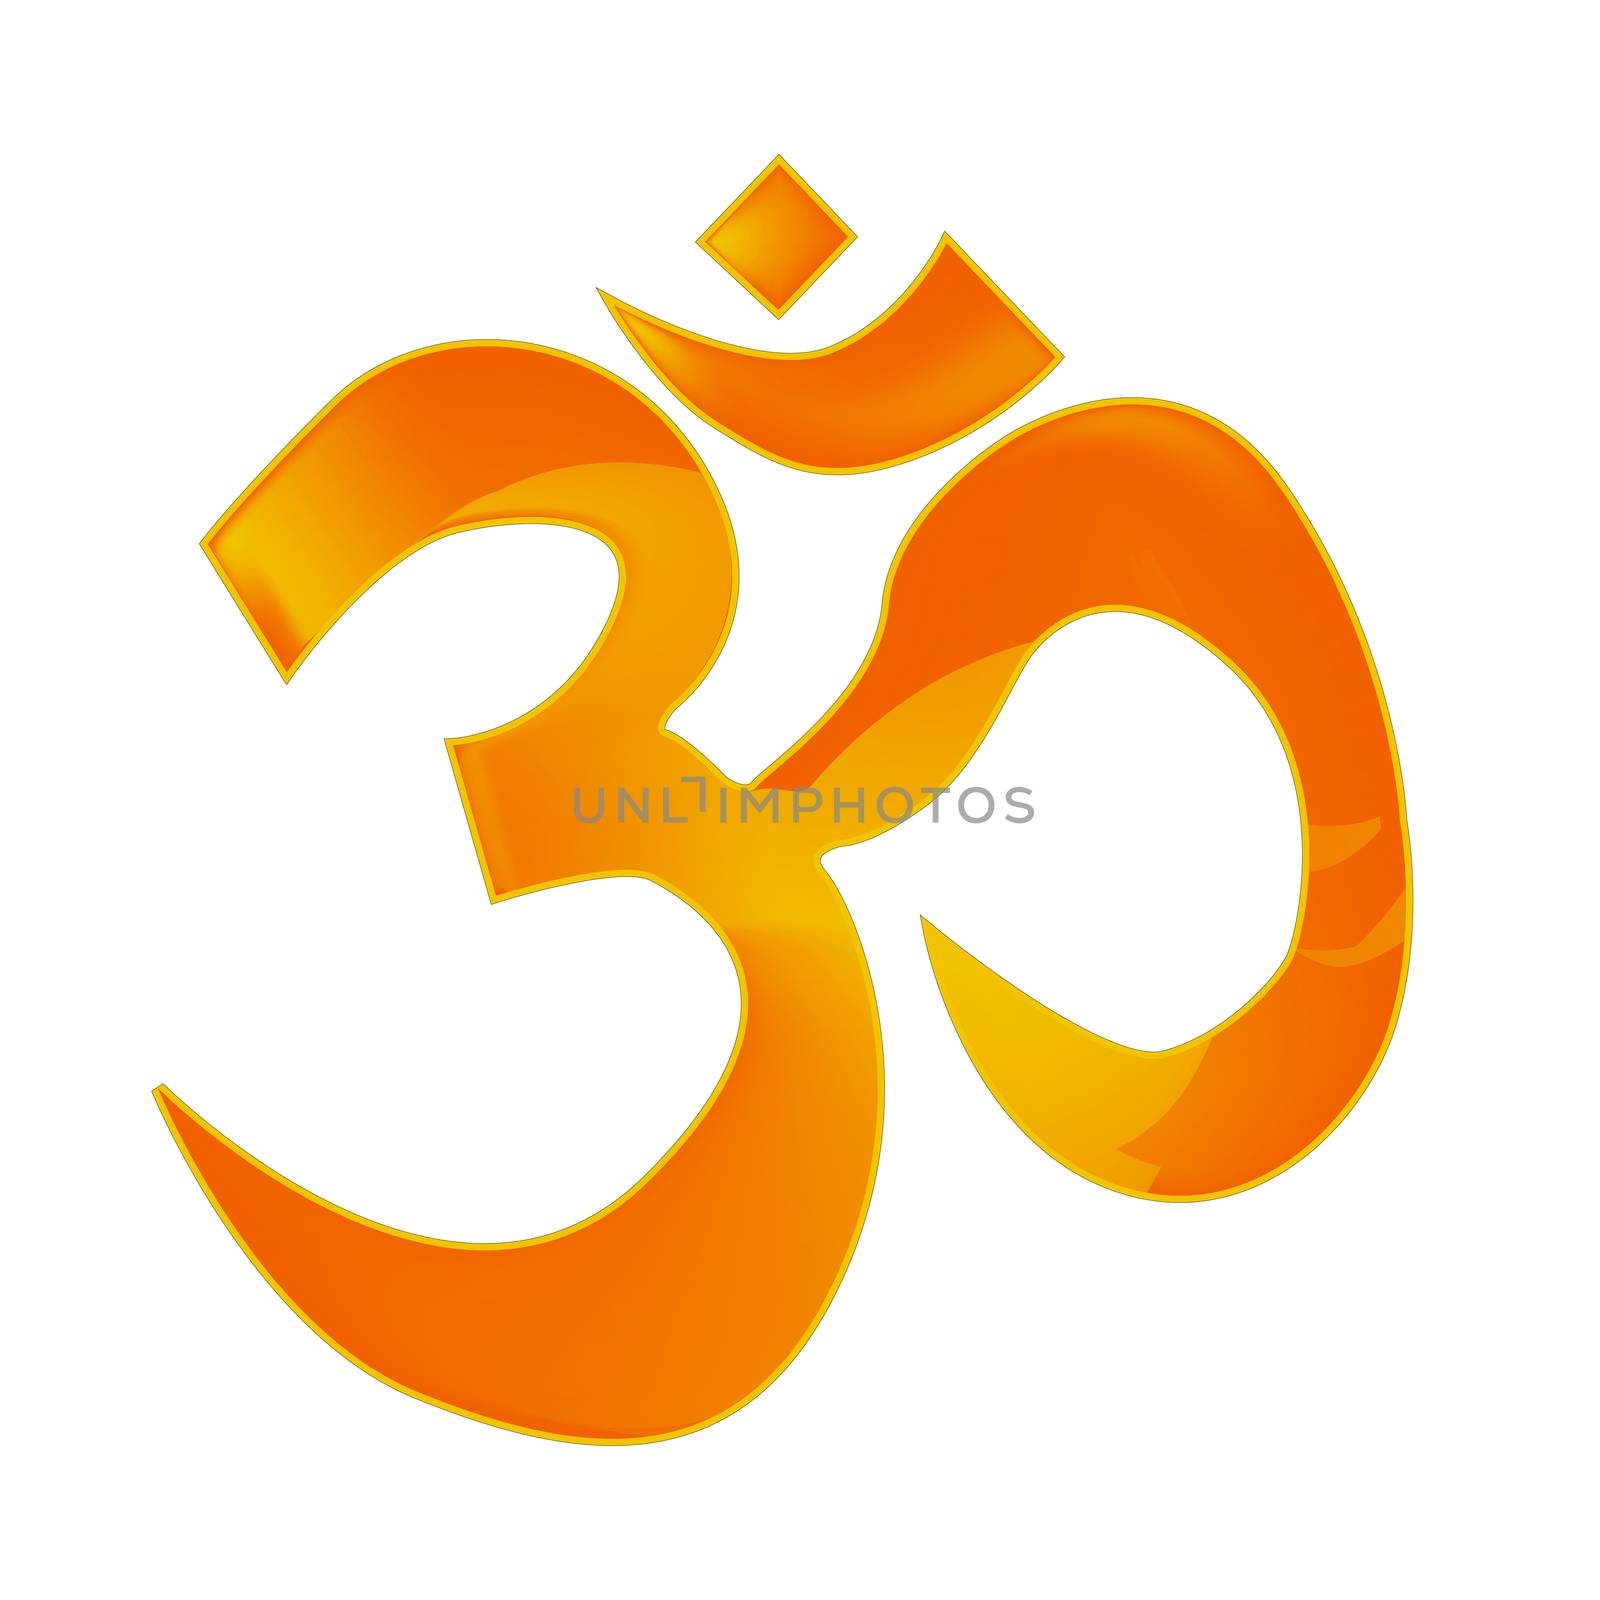 The symbol for 'OM' as used by eastern cultures.